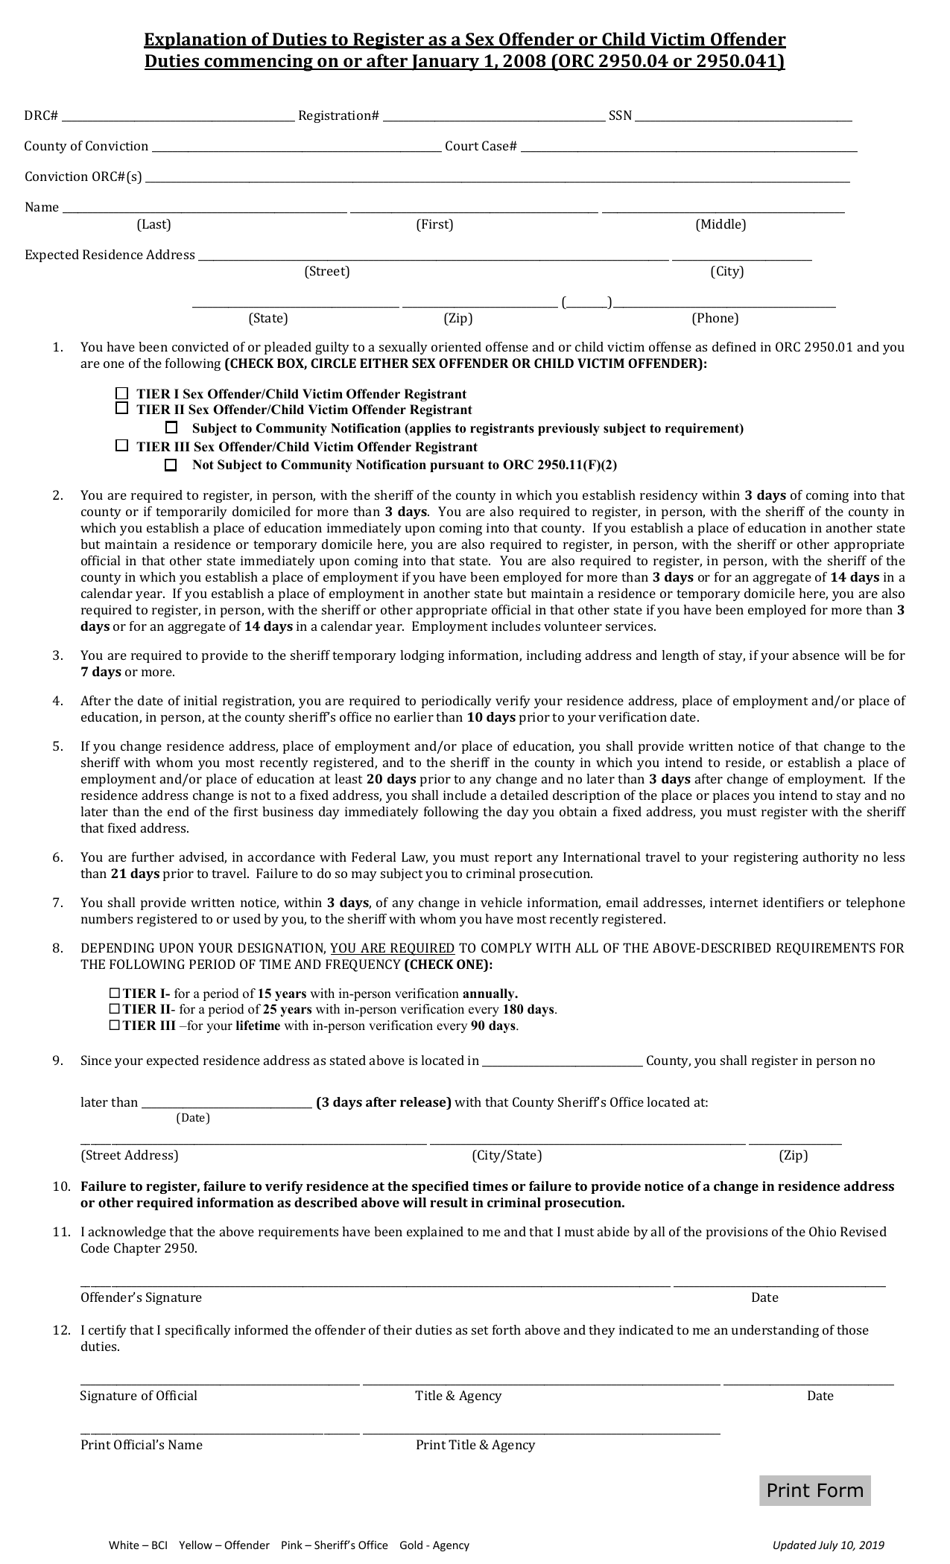 Explanation of Duties to Register as a Sex Offender or Child Victim Offender - Ohio, Page 1